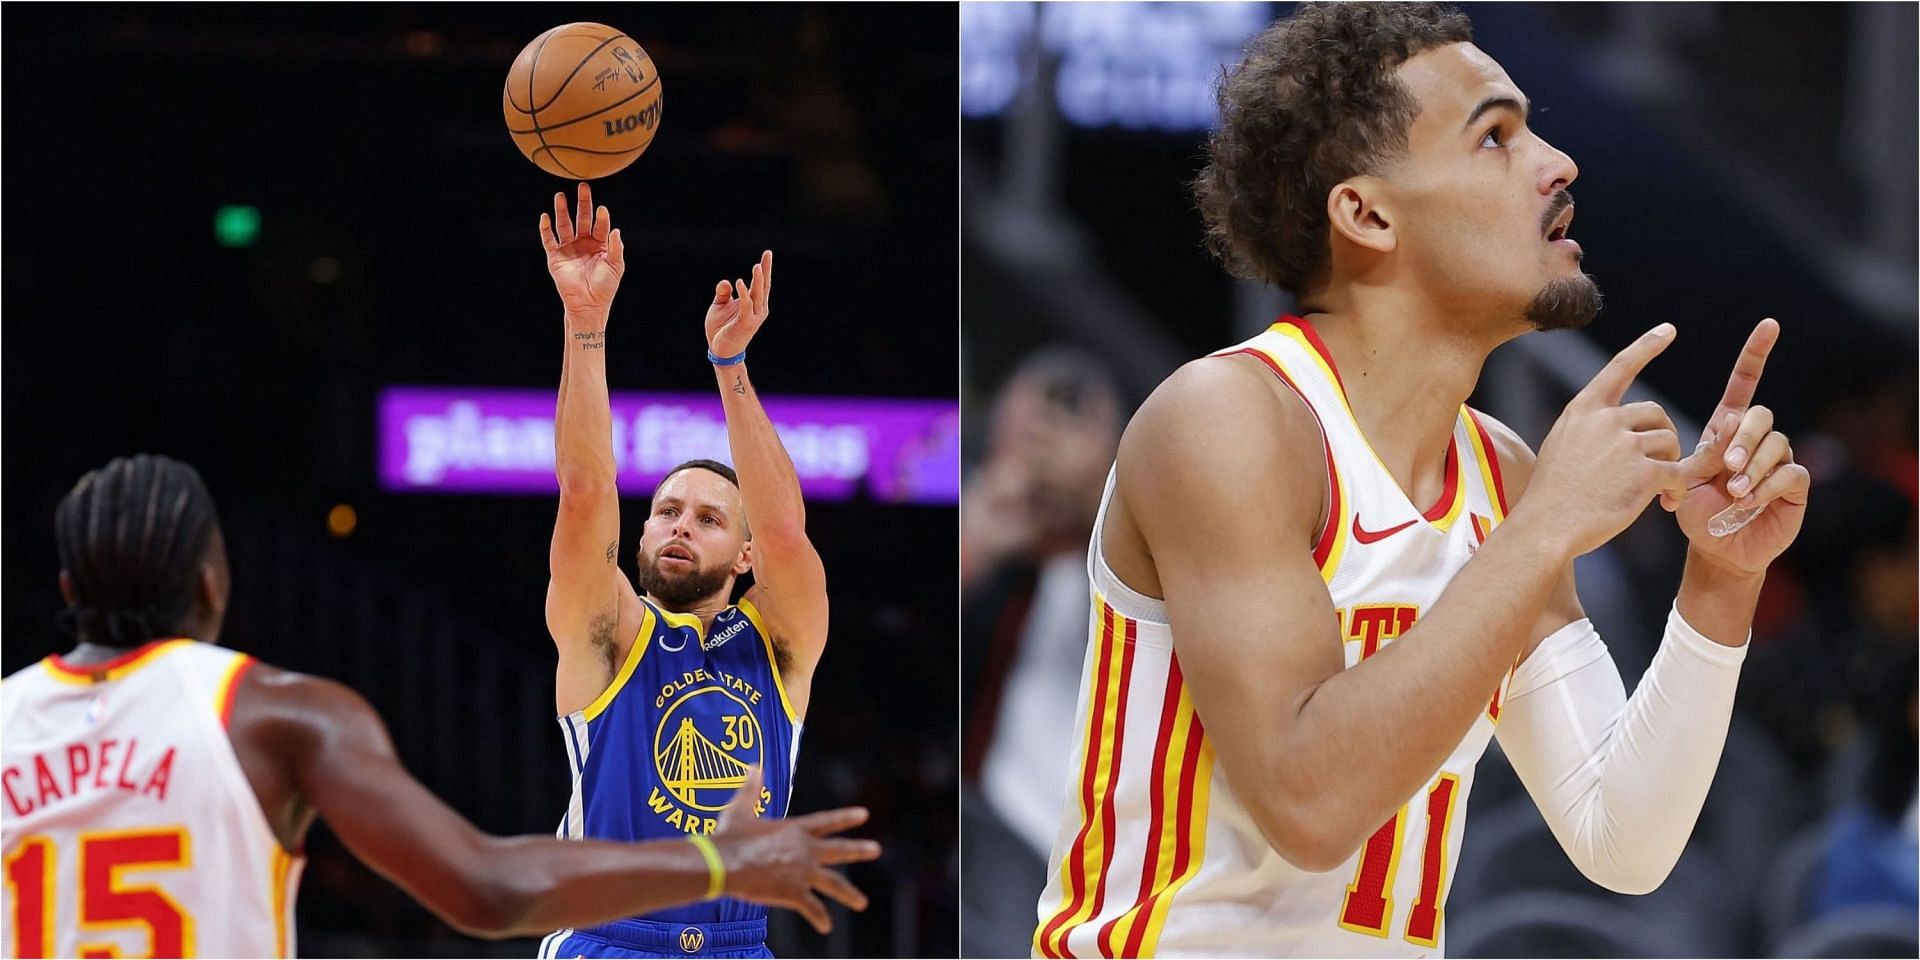 Steph Curry plays mentor to Trae Young